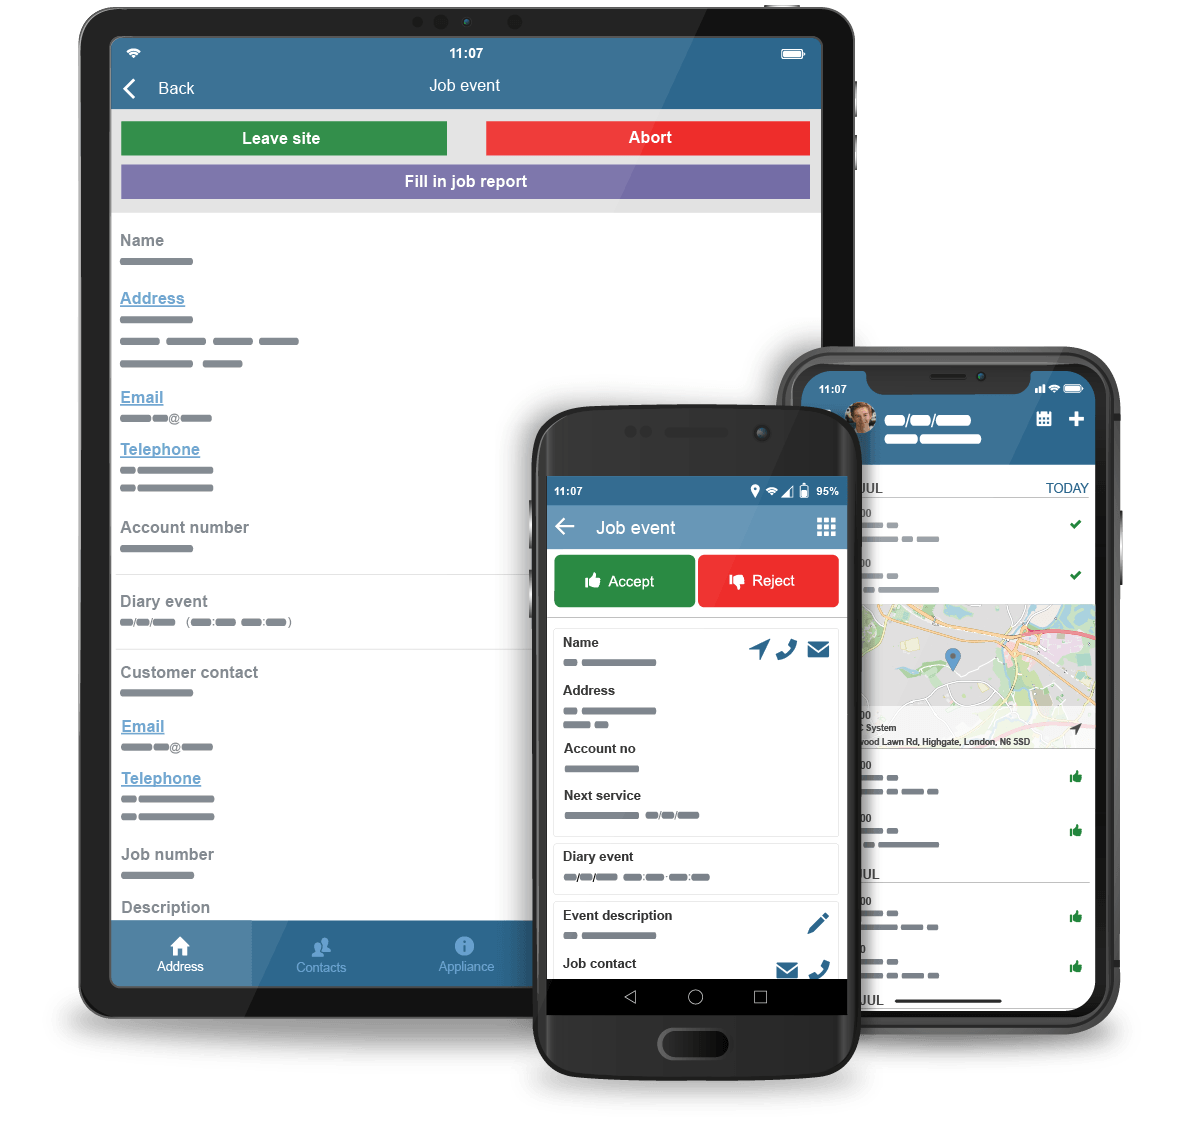 Commusoft on mobile devices